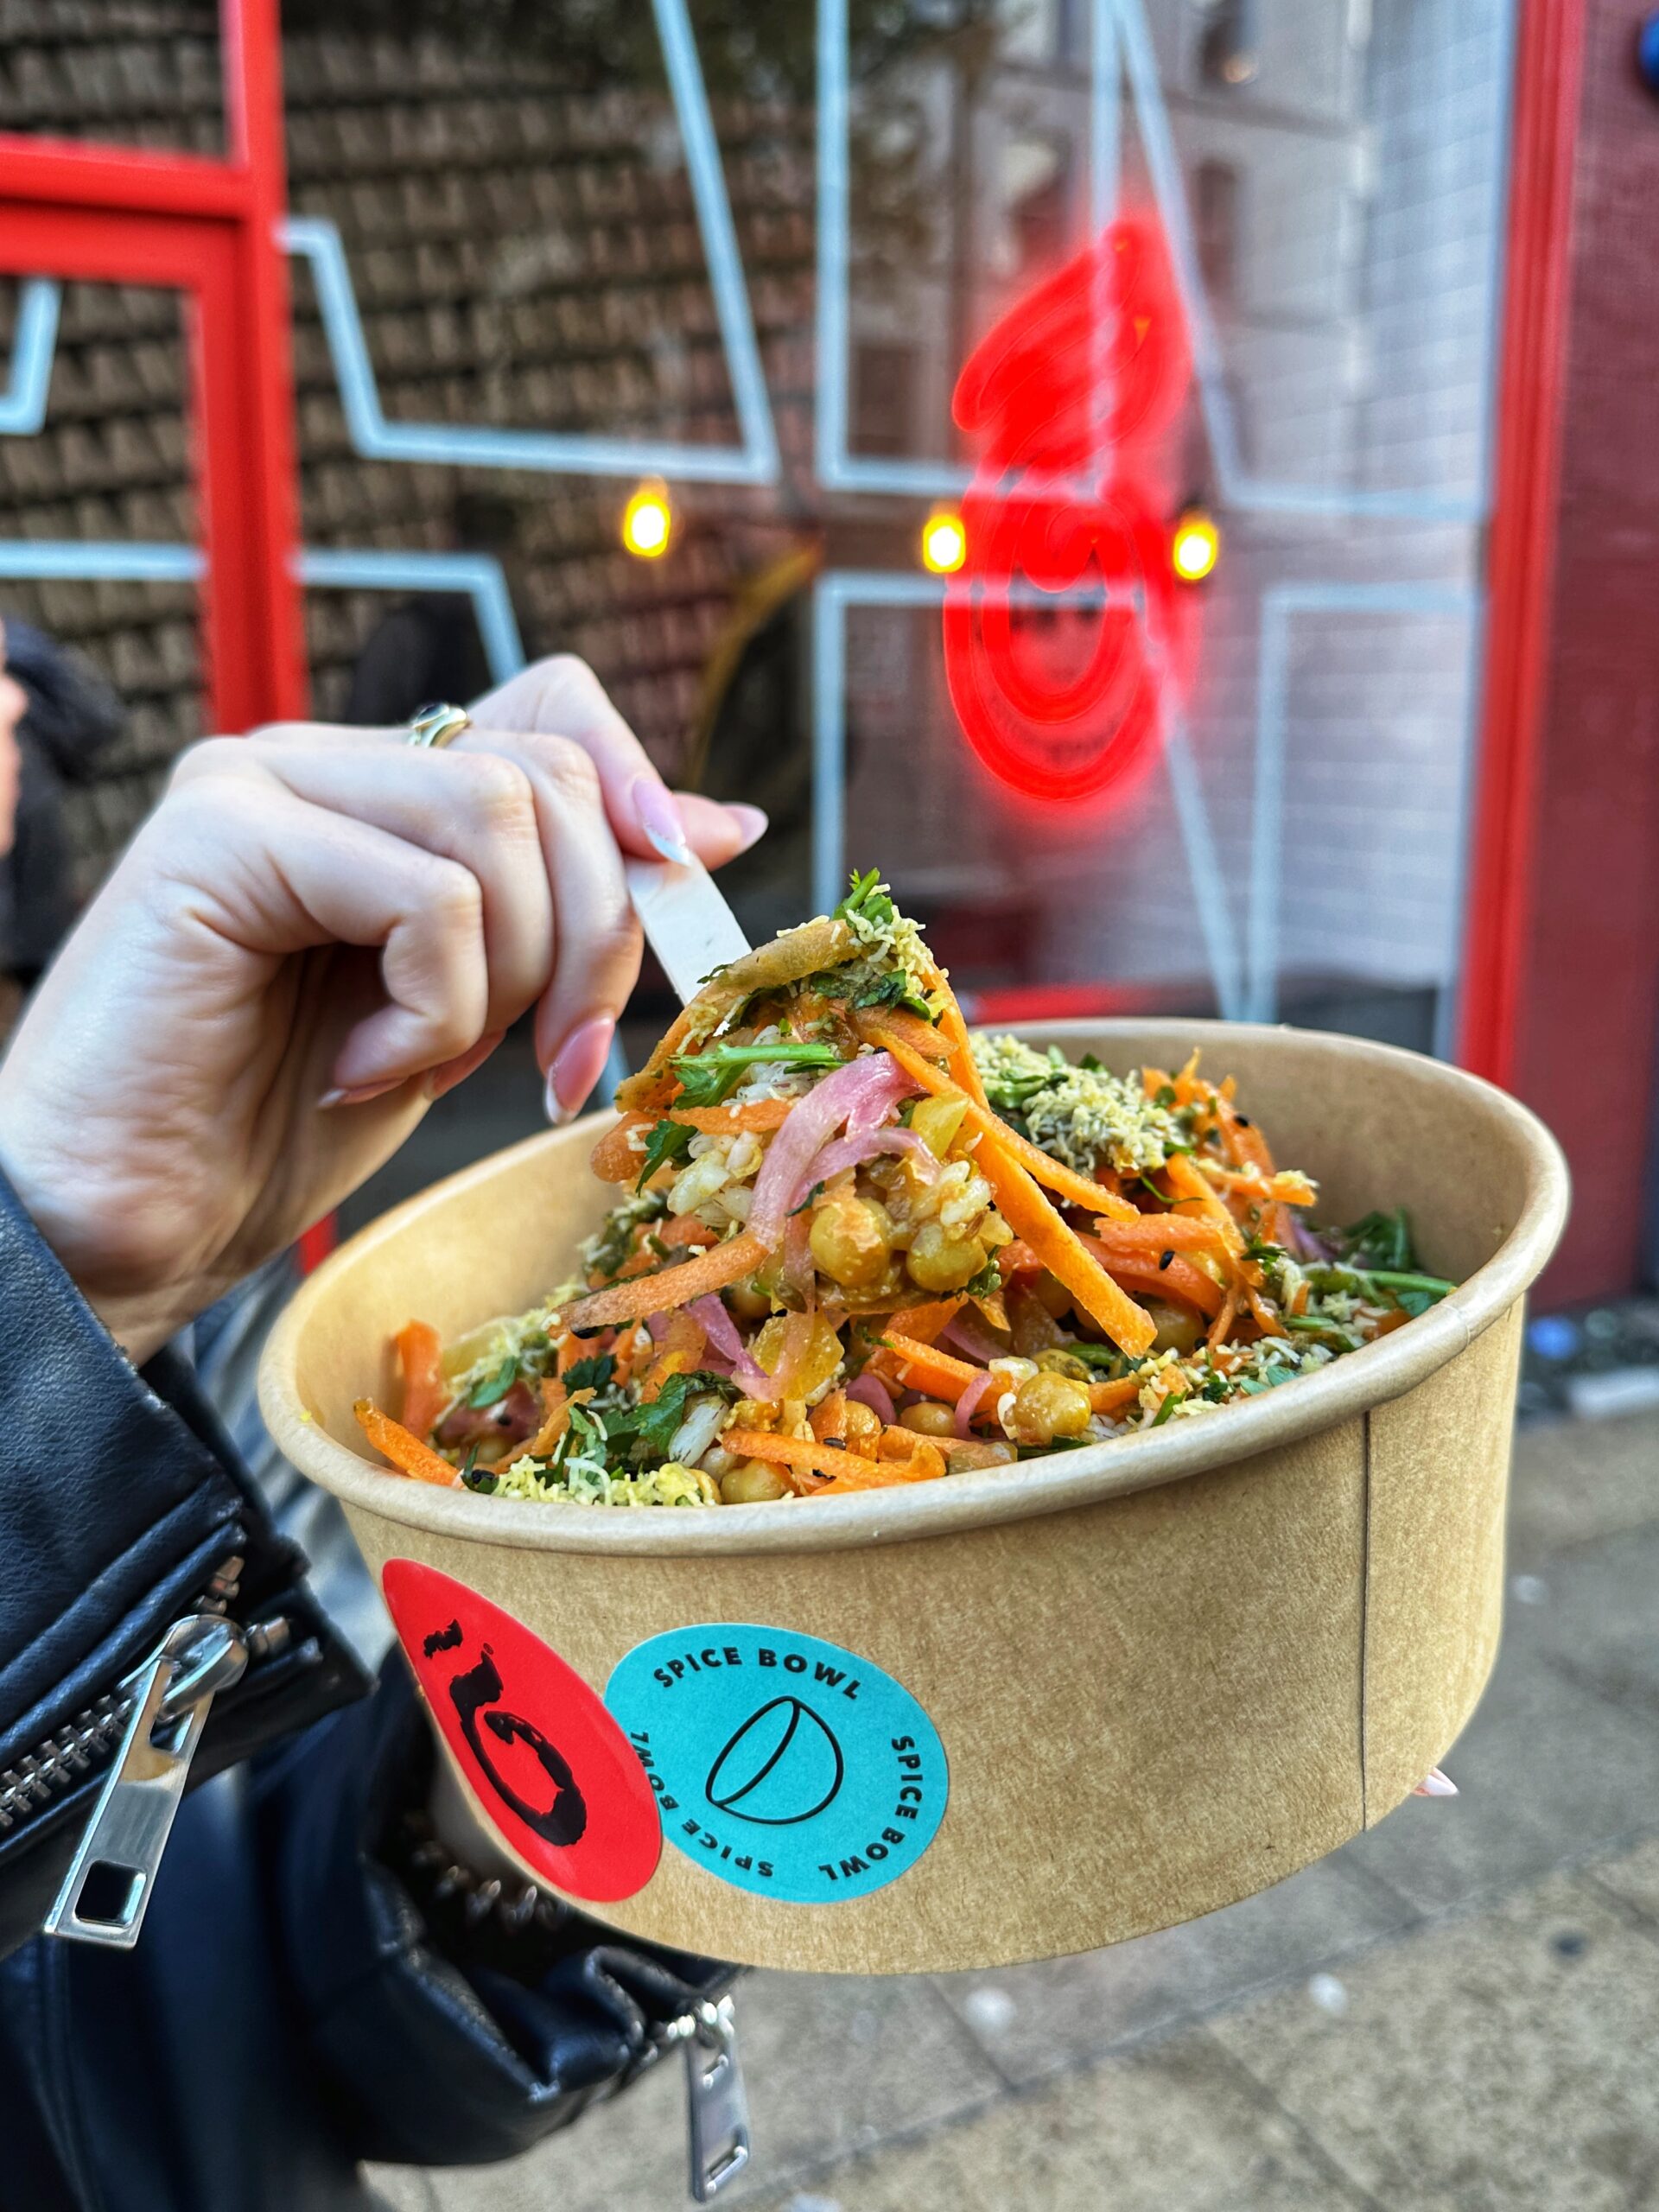 A chickpea masala rice bowl from Rola Wala